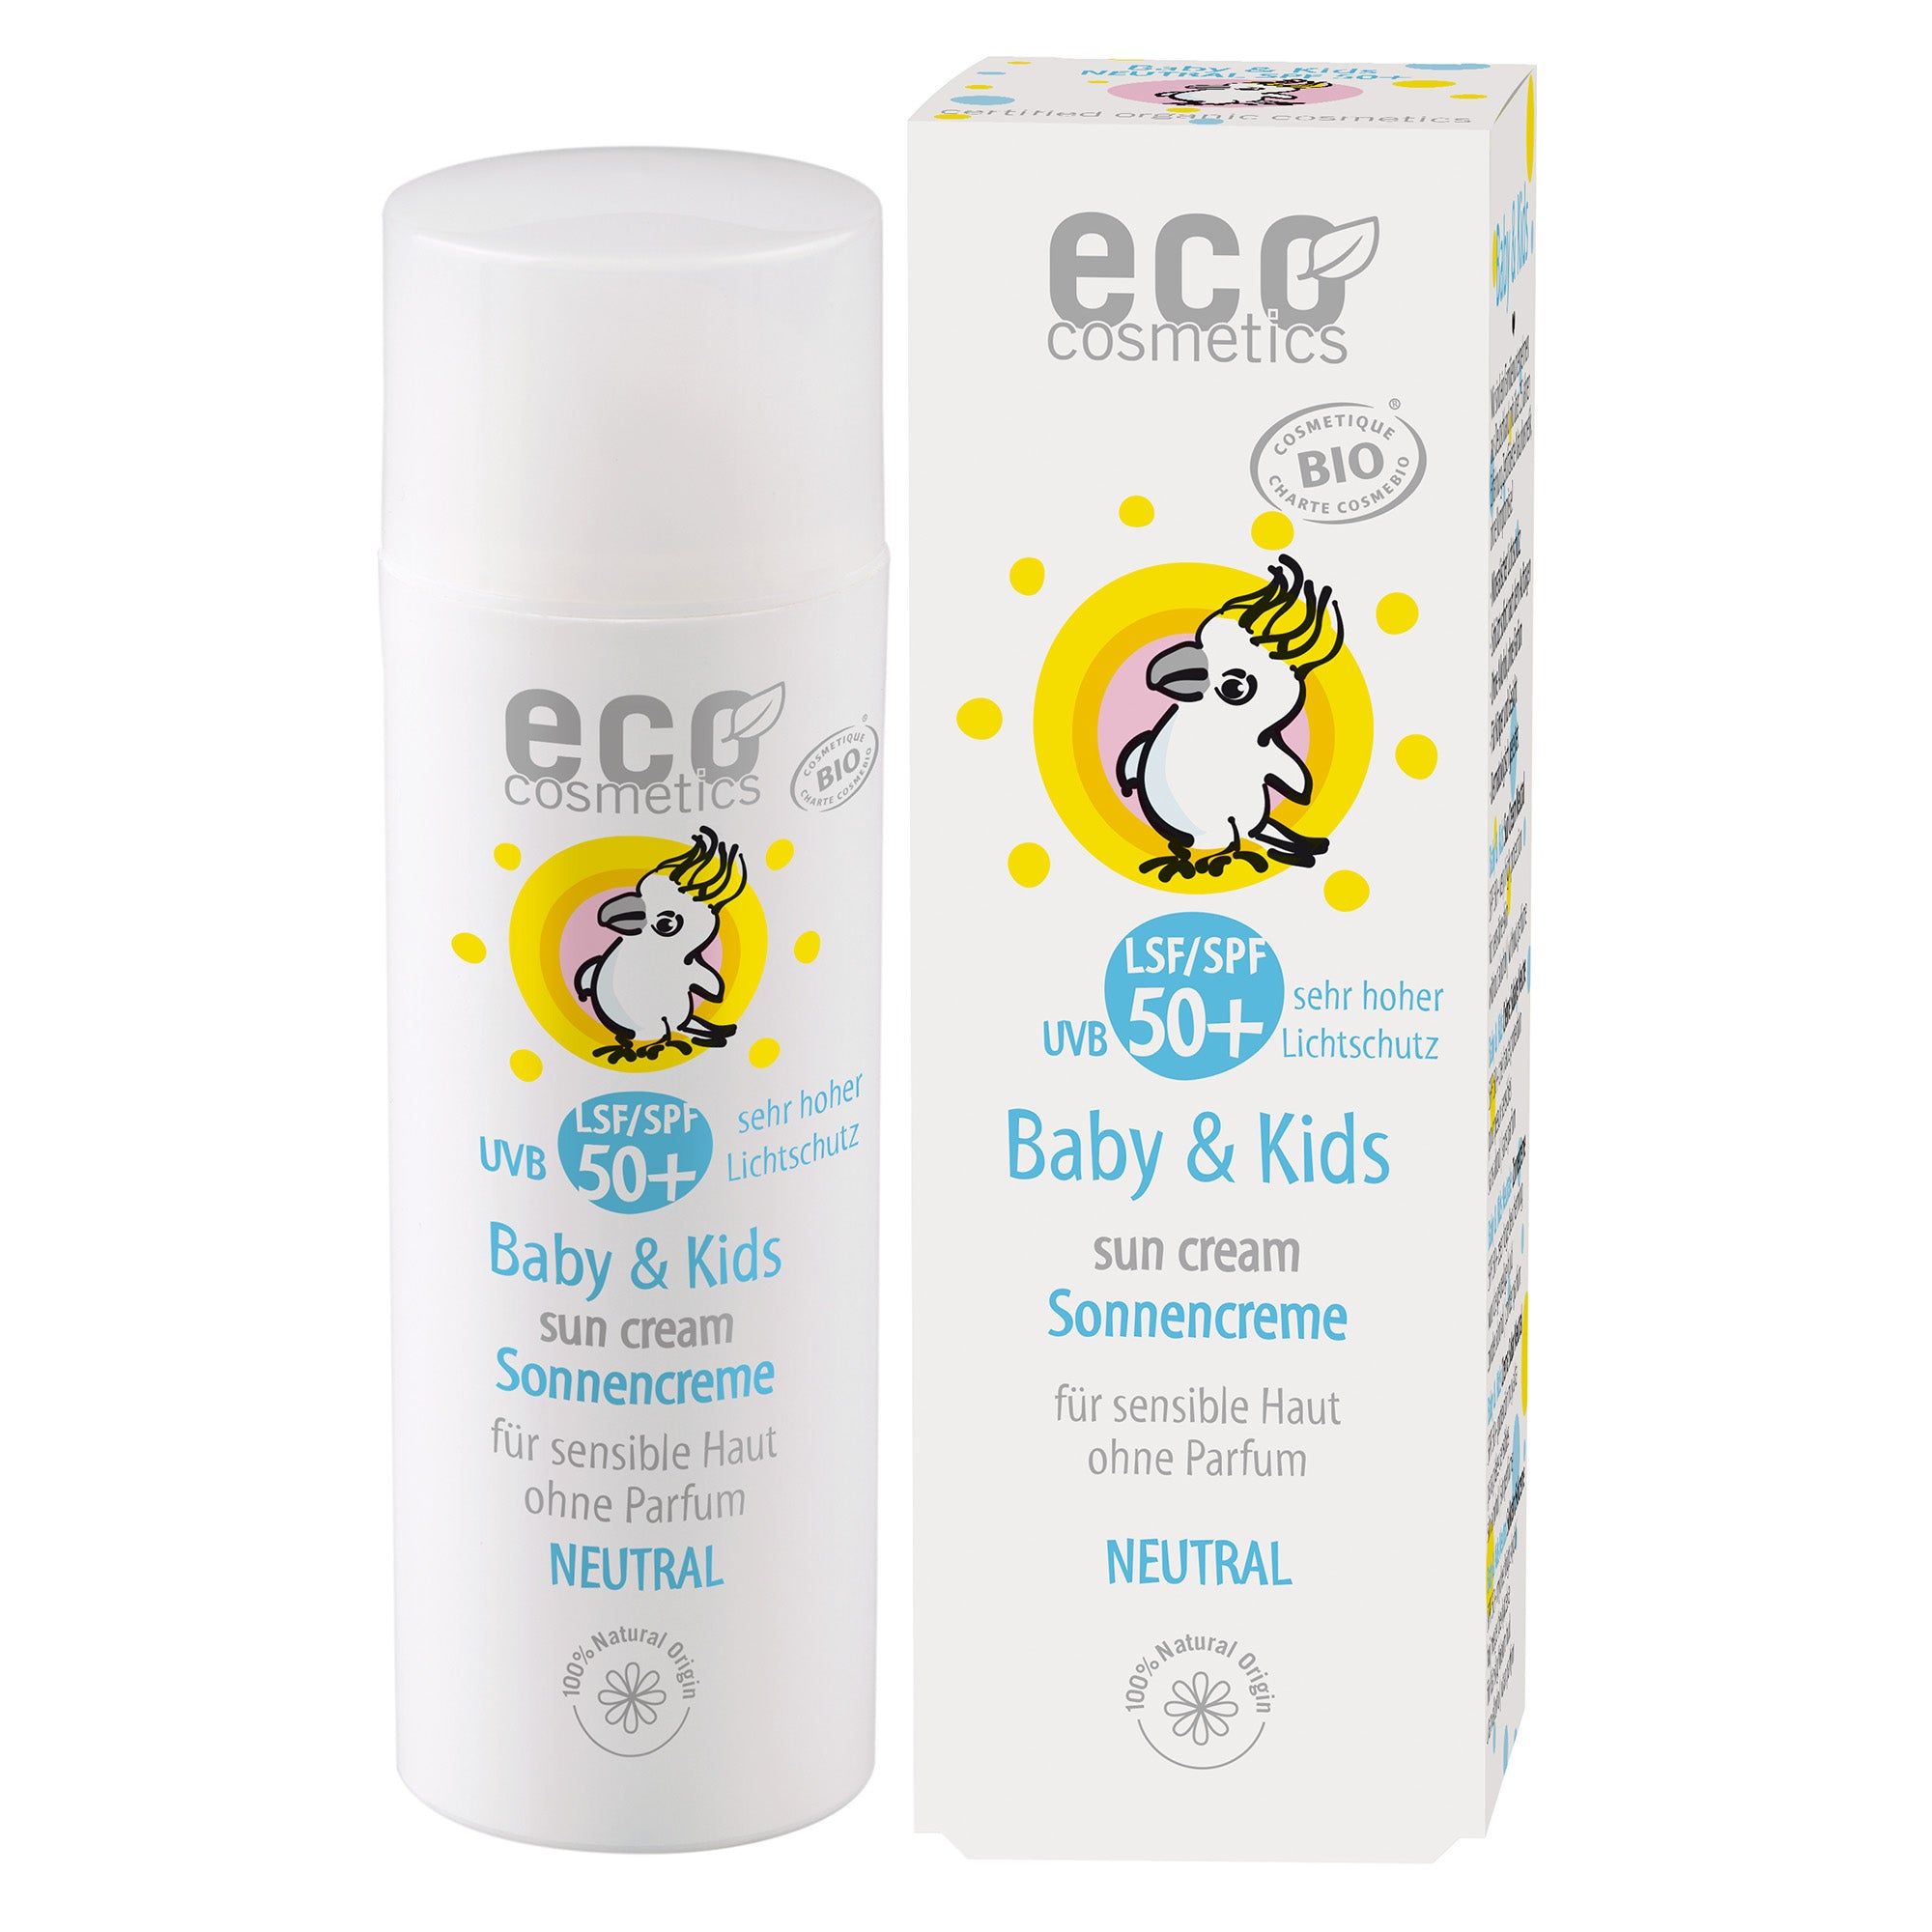 eco cosmetics Baby Sonnencreme Lsf50+ neutral